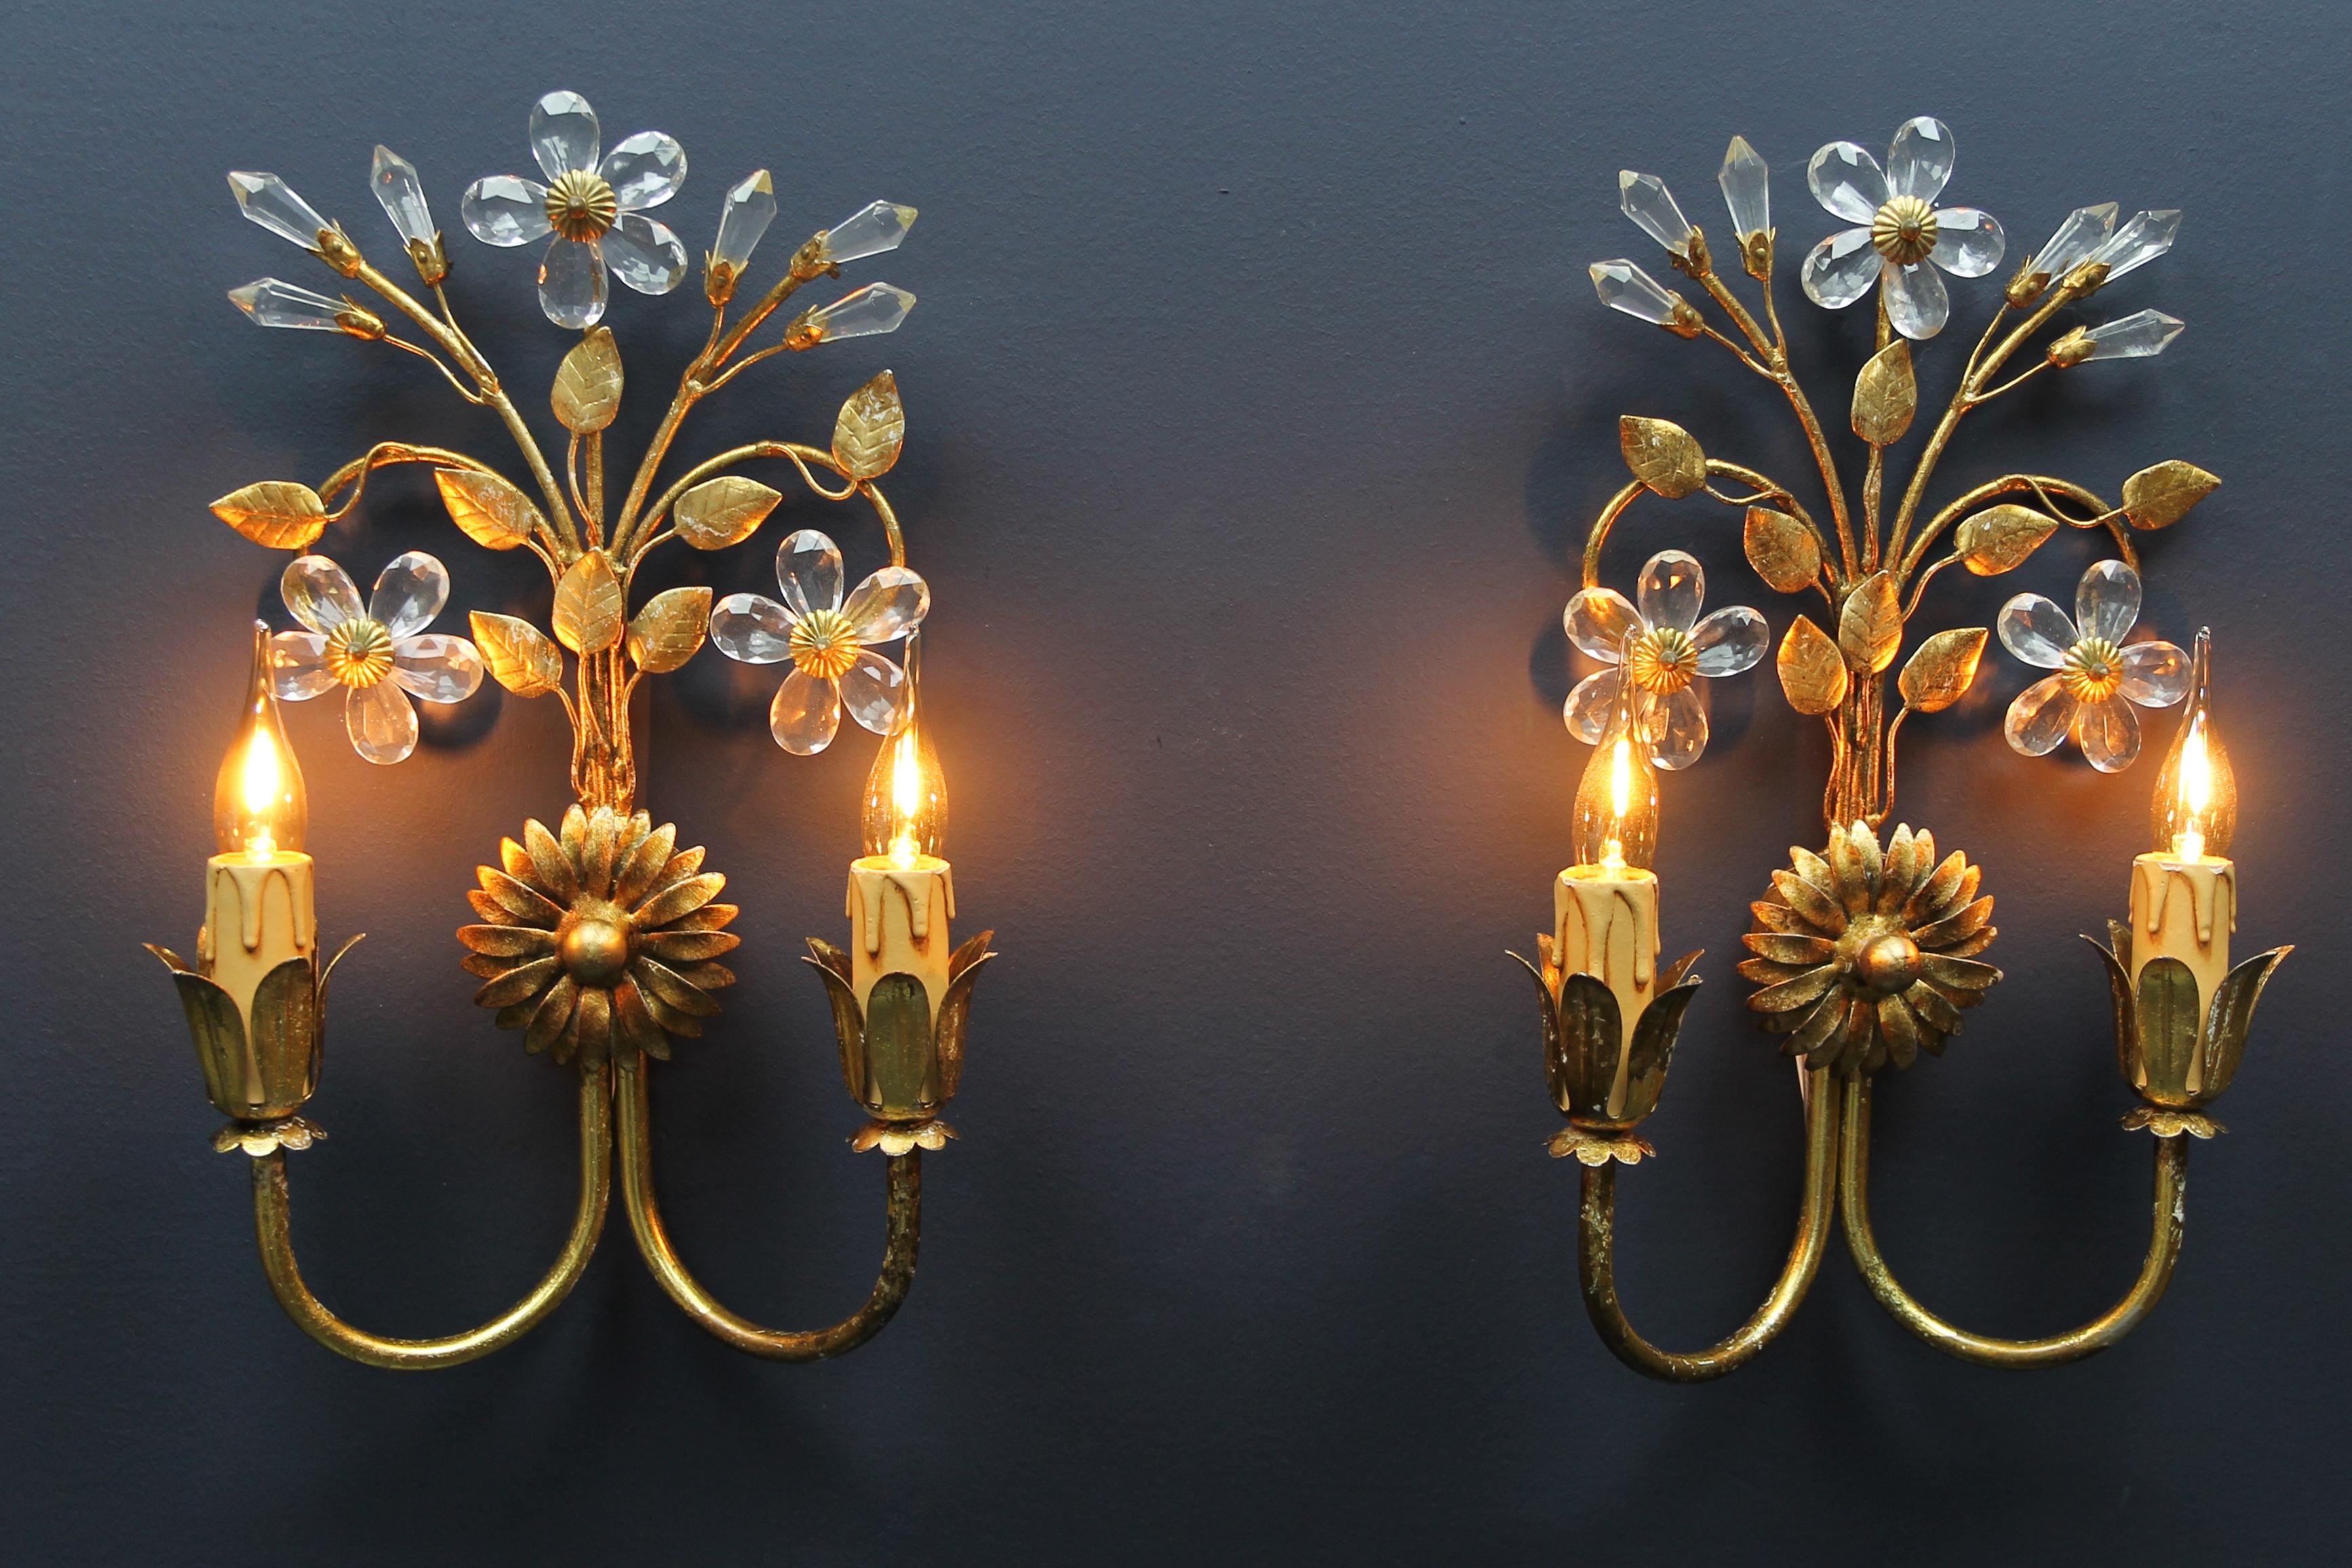 Hollywood Regency style Italian gilt metal and glass flower double wall lamps, set of two.
A beautiful set of two gilt metal wall lights with glass flowers and buds, gilt metal leaves. Each sconce has two arms with sockets for an E14-Size light